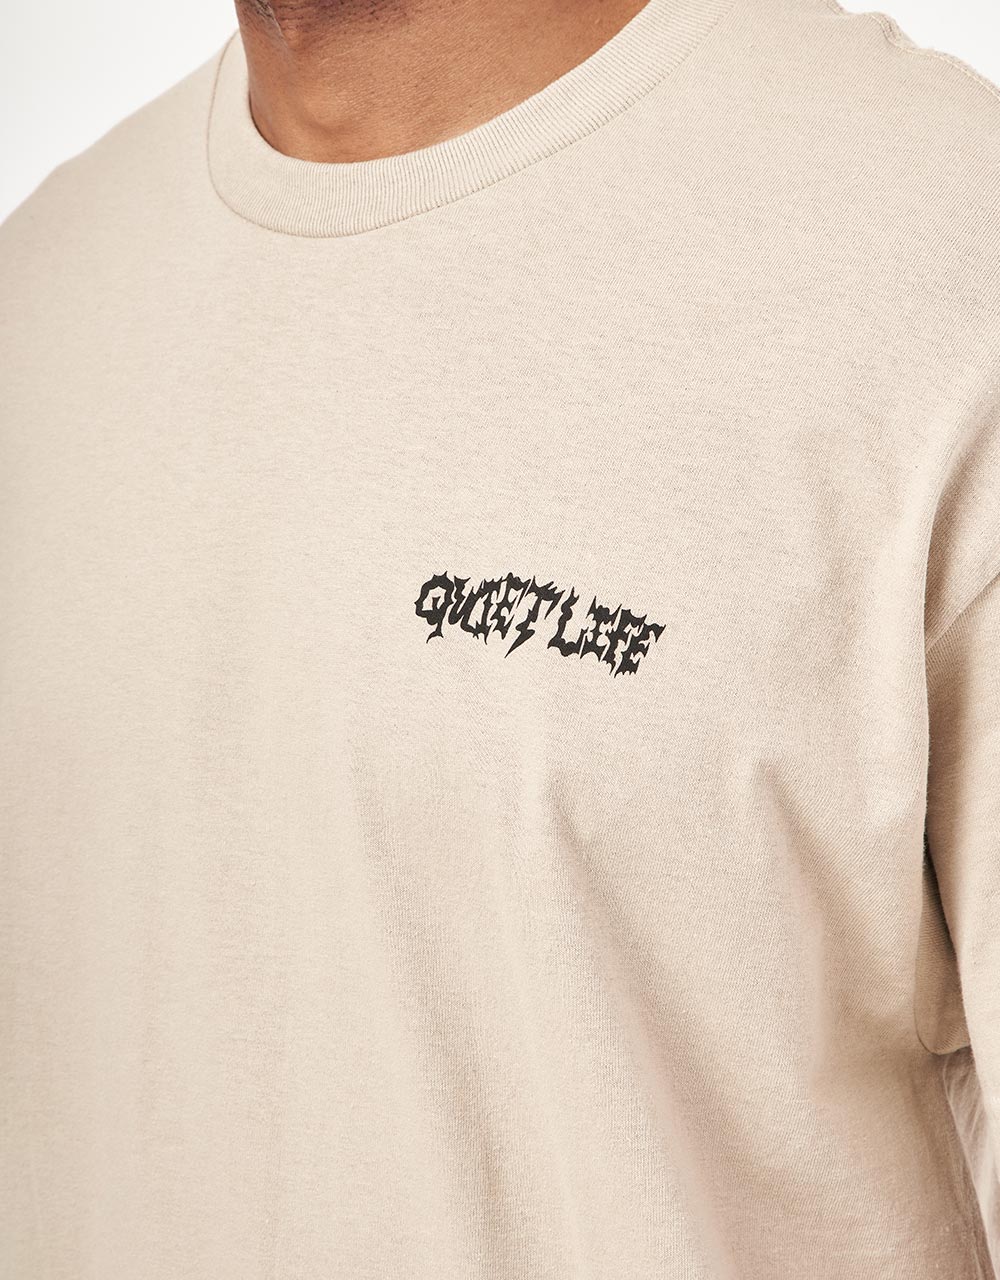 The Quiet Life Jay Doodle T-Shirt - Sand